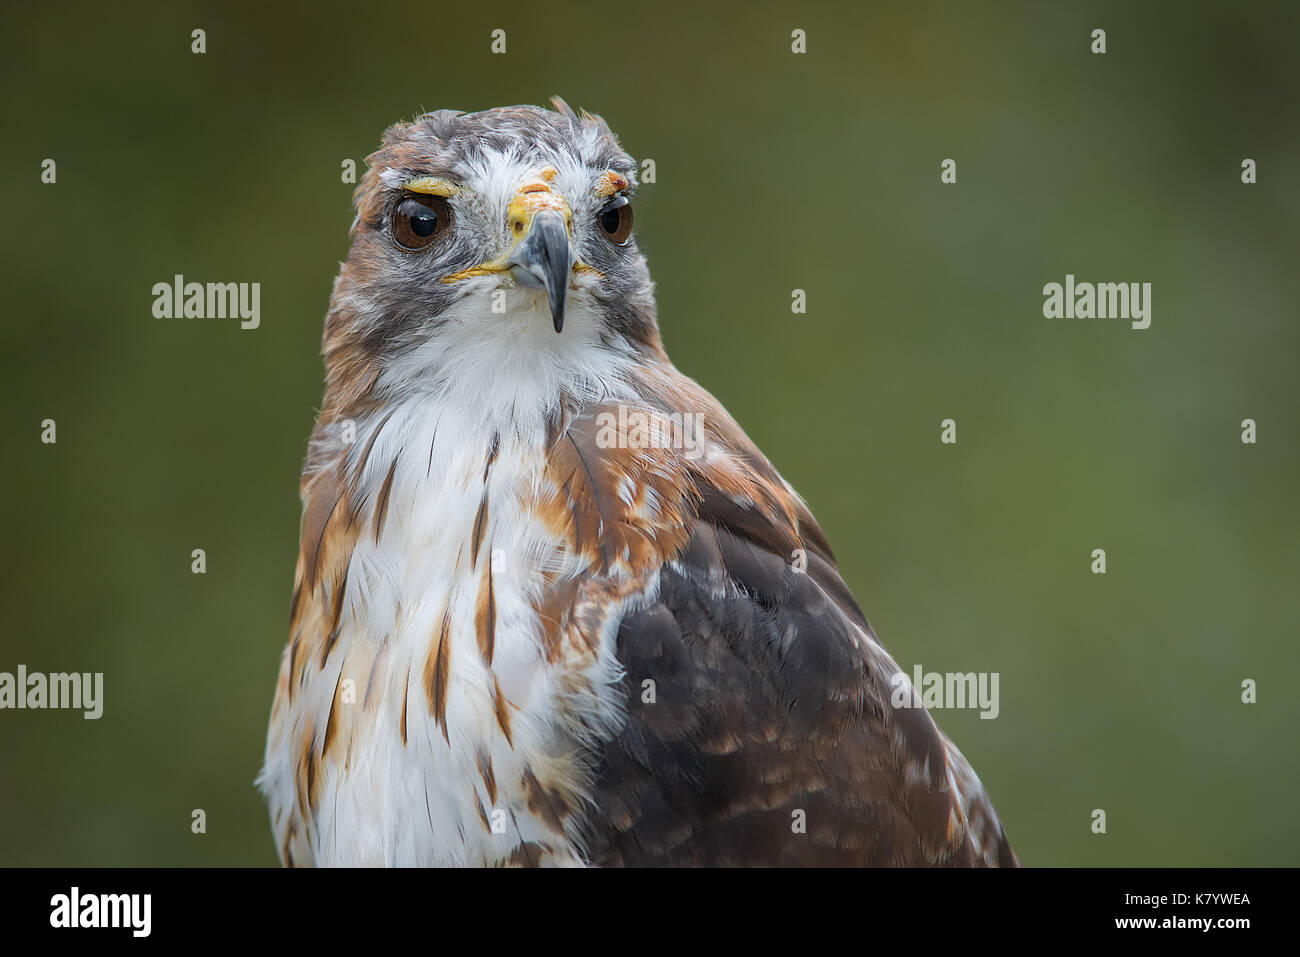 A very close half length portrait of a red tailed hawk staring inquisitively to the right against a natural plain green background Stock Photo